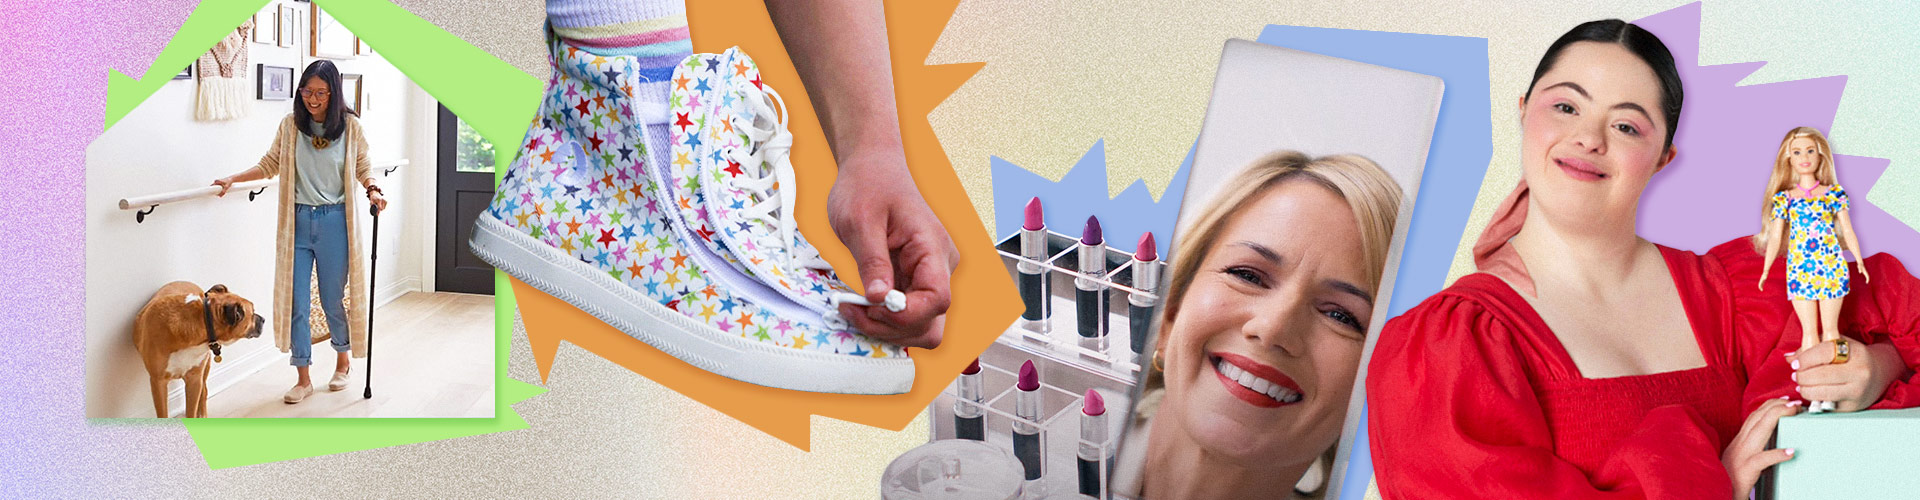 Walking the Talk of New Inclusion blog banner featuring colorful collage of Lowe's Livable Home, zip-up shoes, The Joy Project, and down-syndrome Barbie